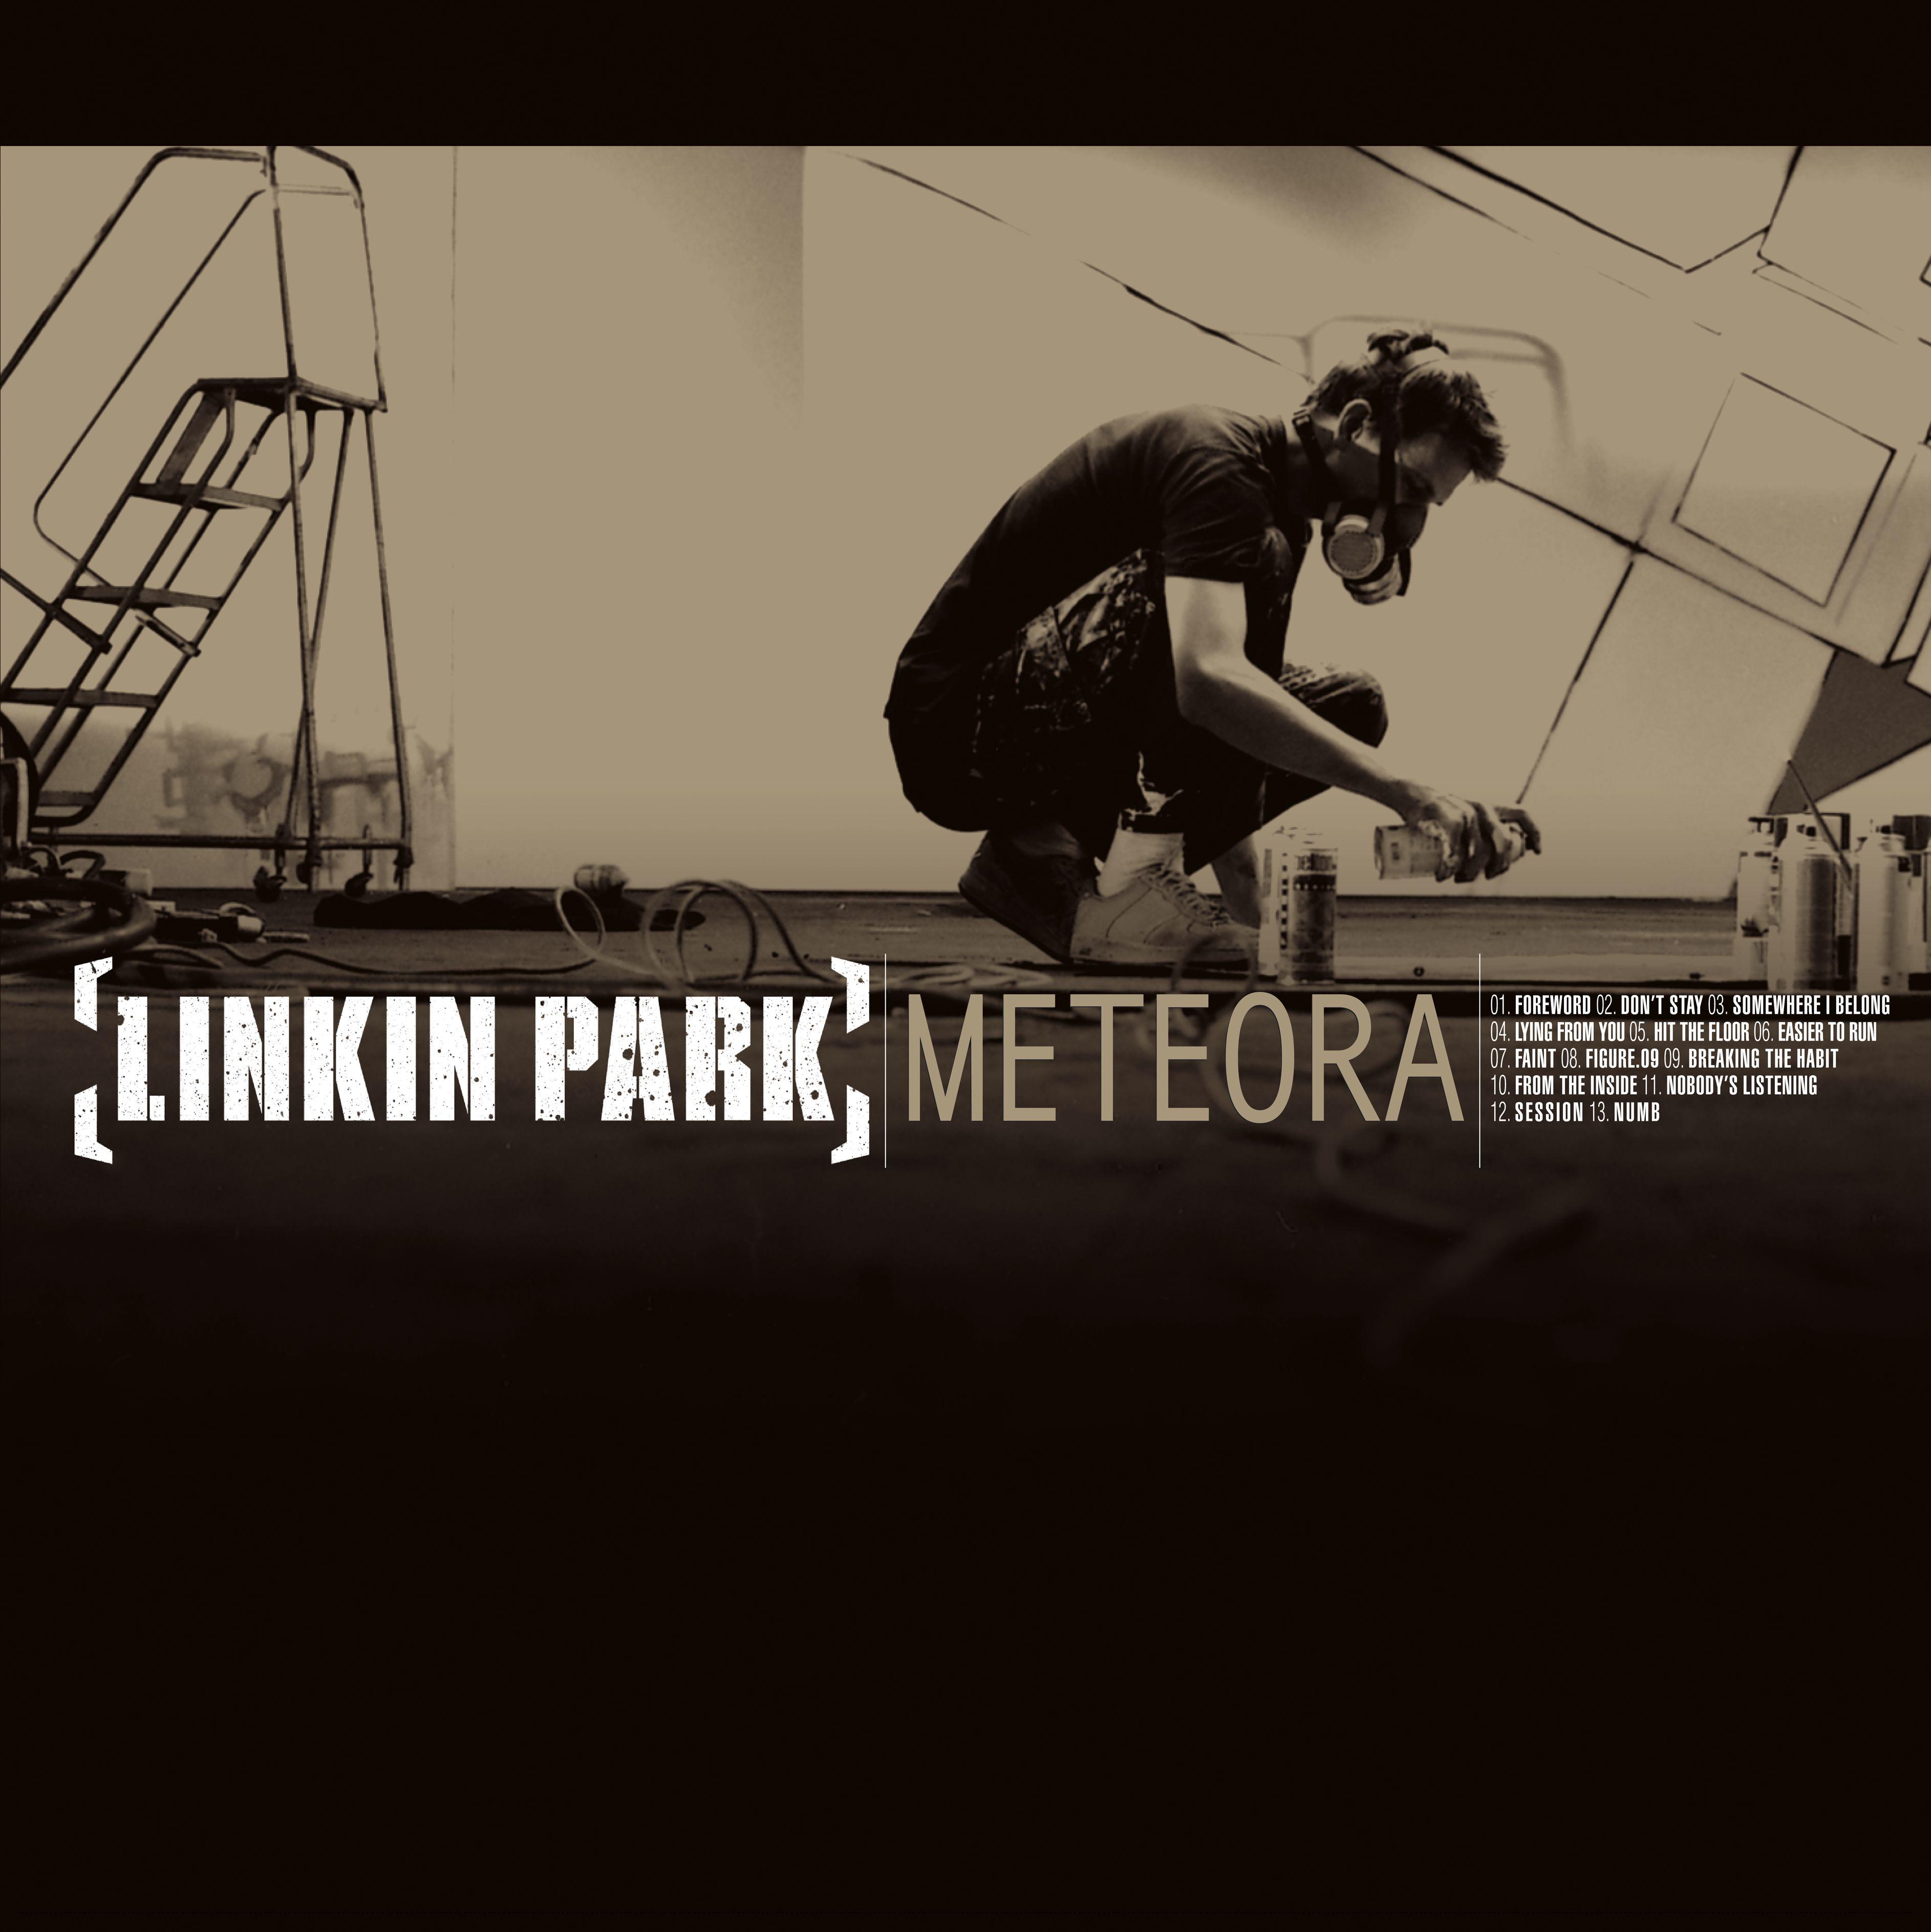 Linkin Park - From The Inside [Live LP Underground Tour 2003]